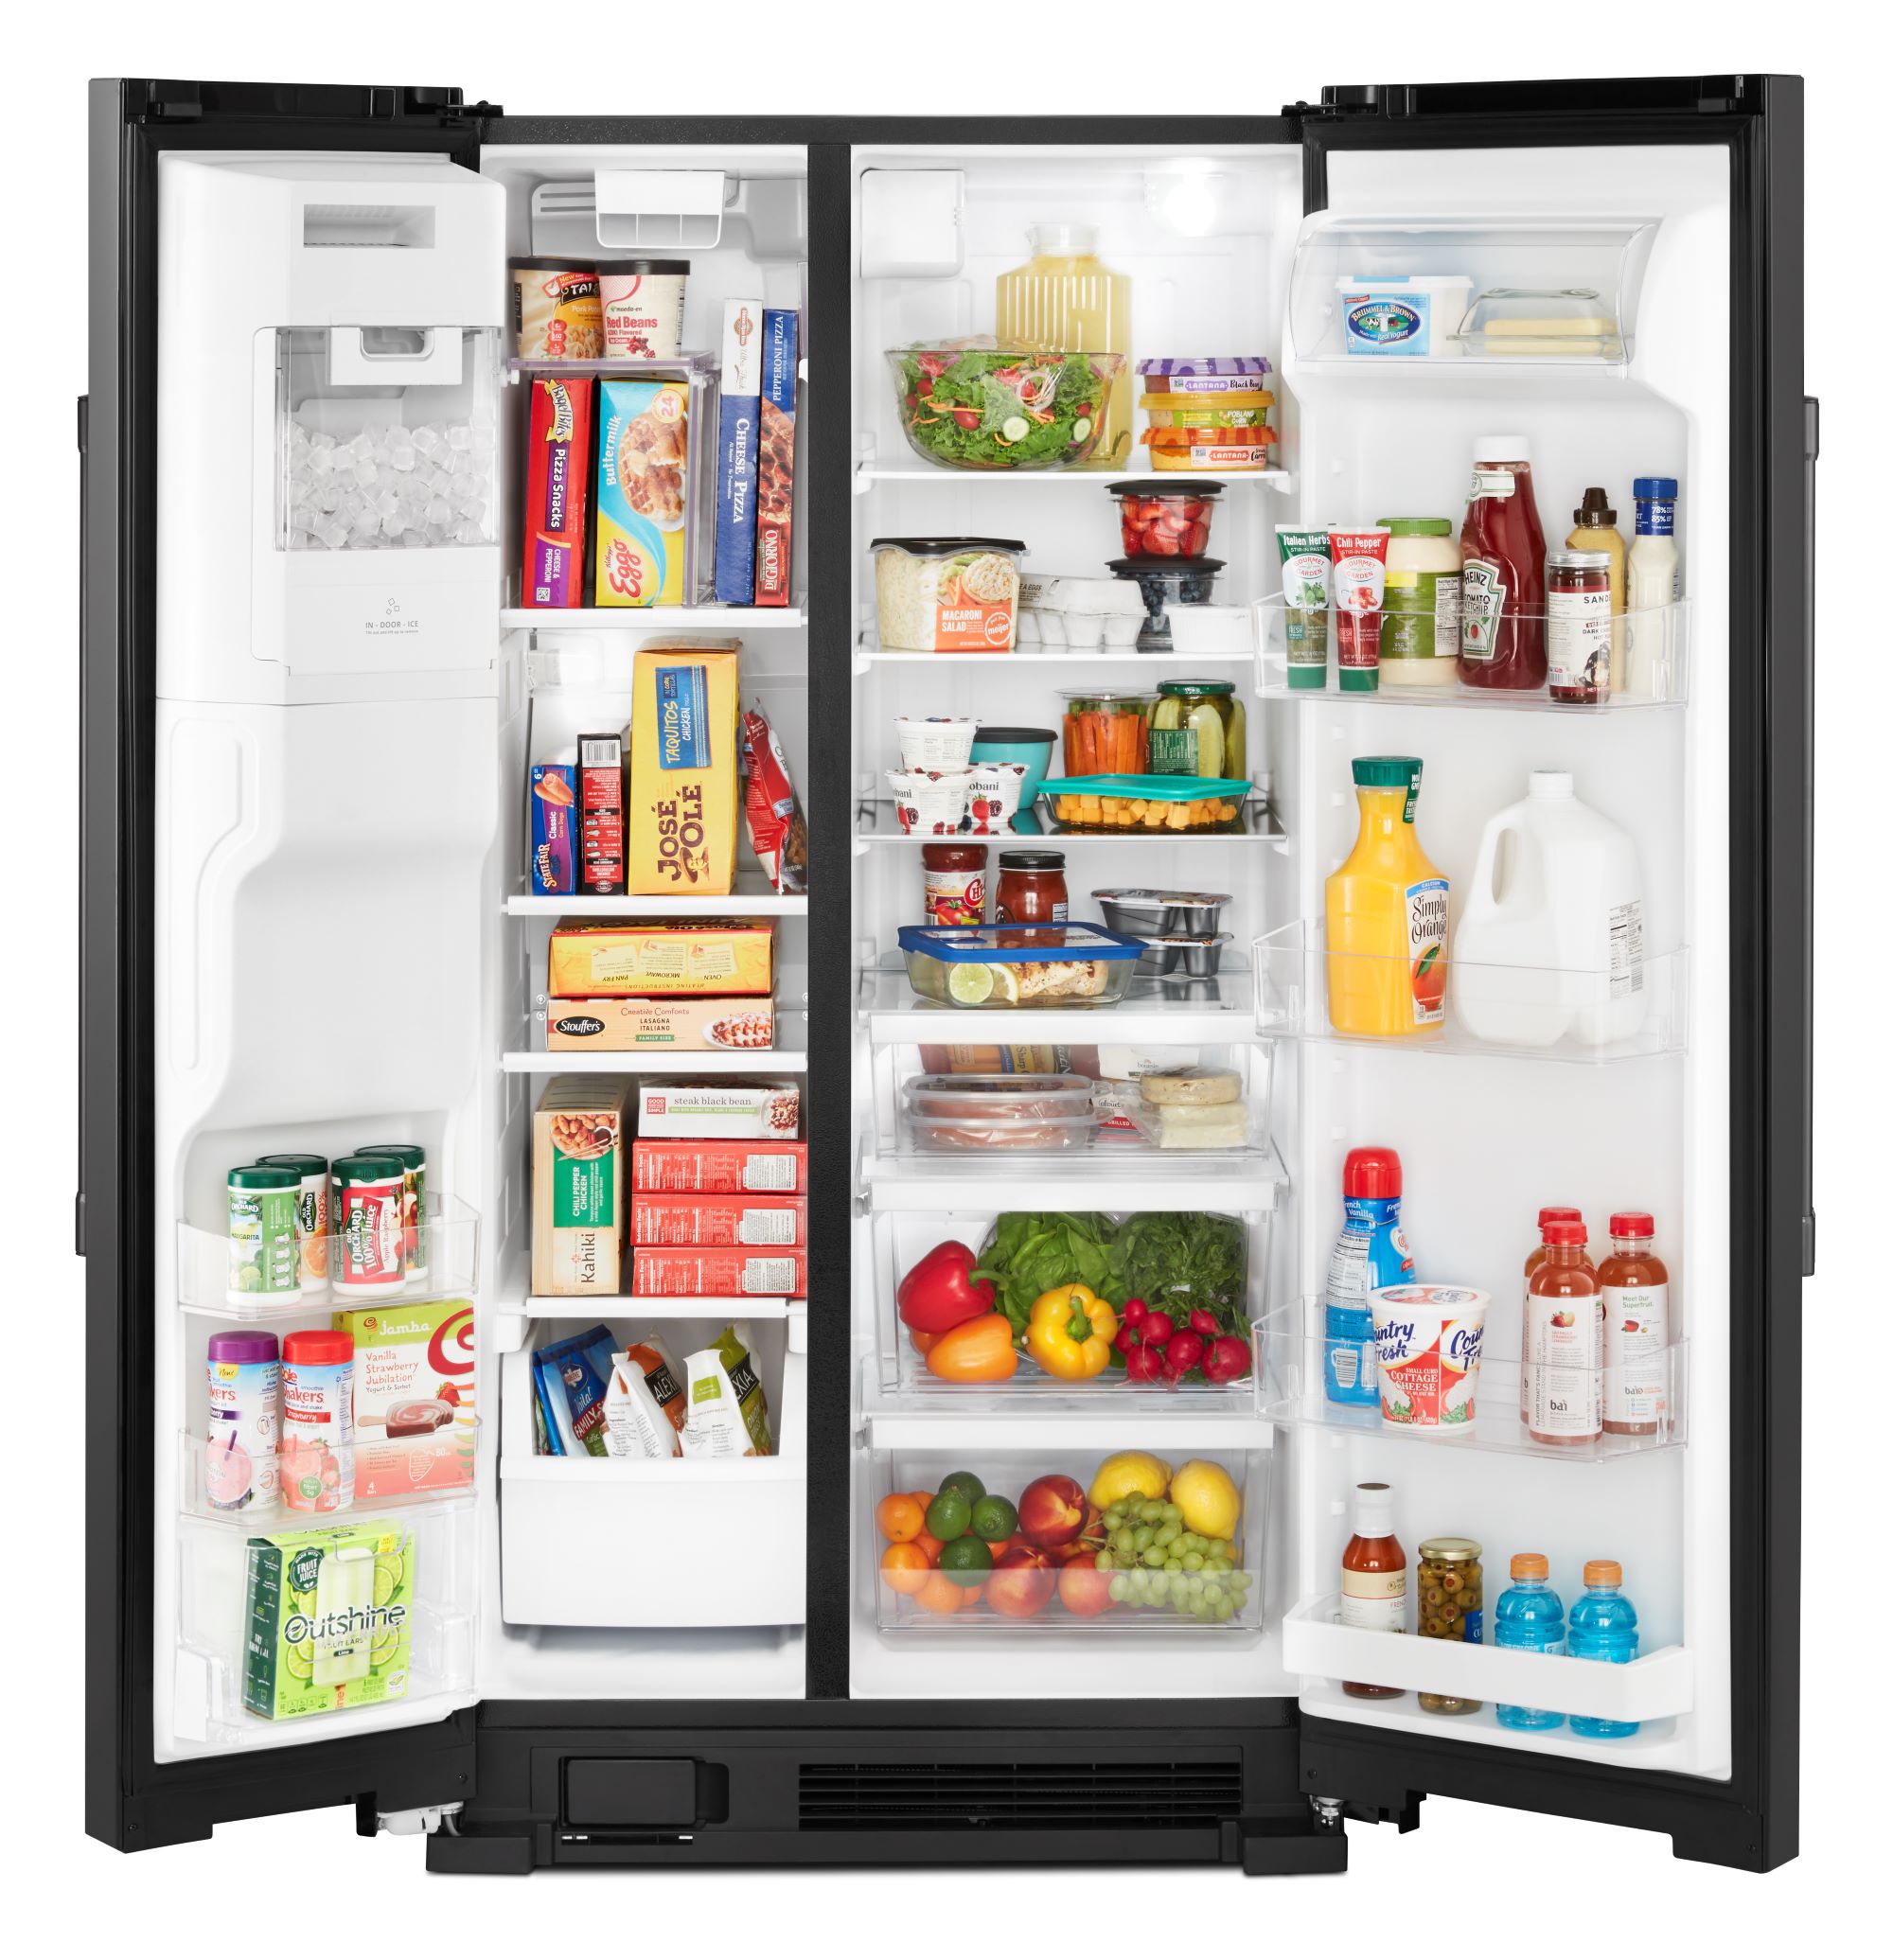 Maytag 24.5-cu ft Side-by-Side Refrigerator with Ice Maker (Black) in ...